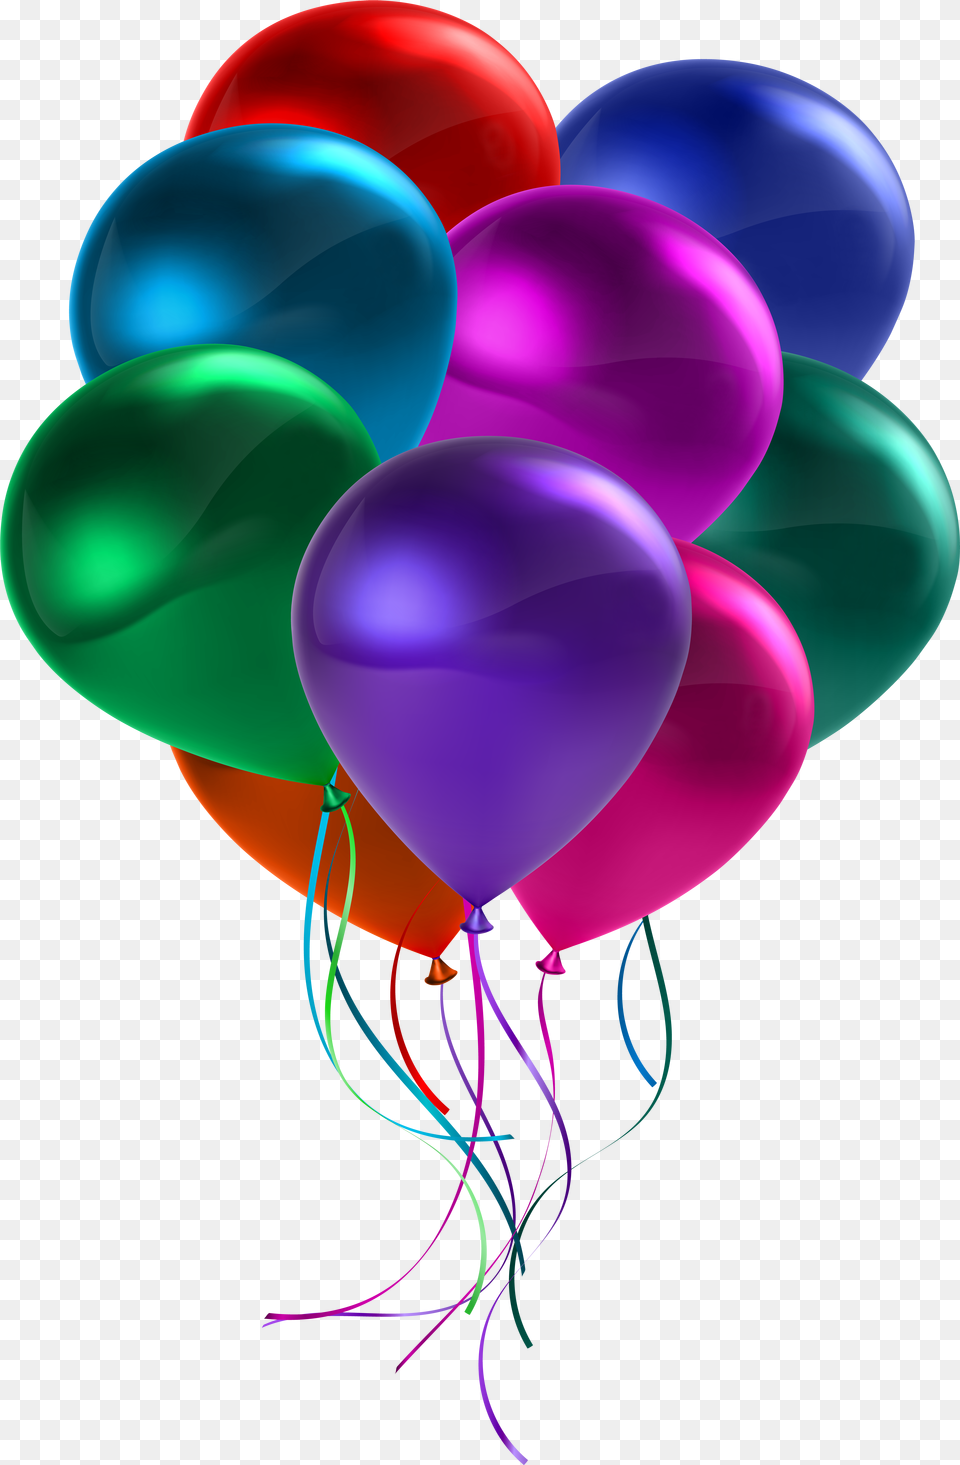 Bunch Of Colorful Balloons Transparent Happy Birthday Colorful Balloons Clipart, Rocket, Weapon, Toy, Kite Png